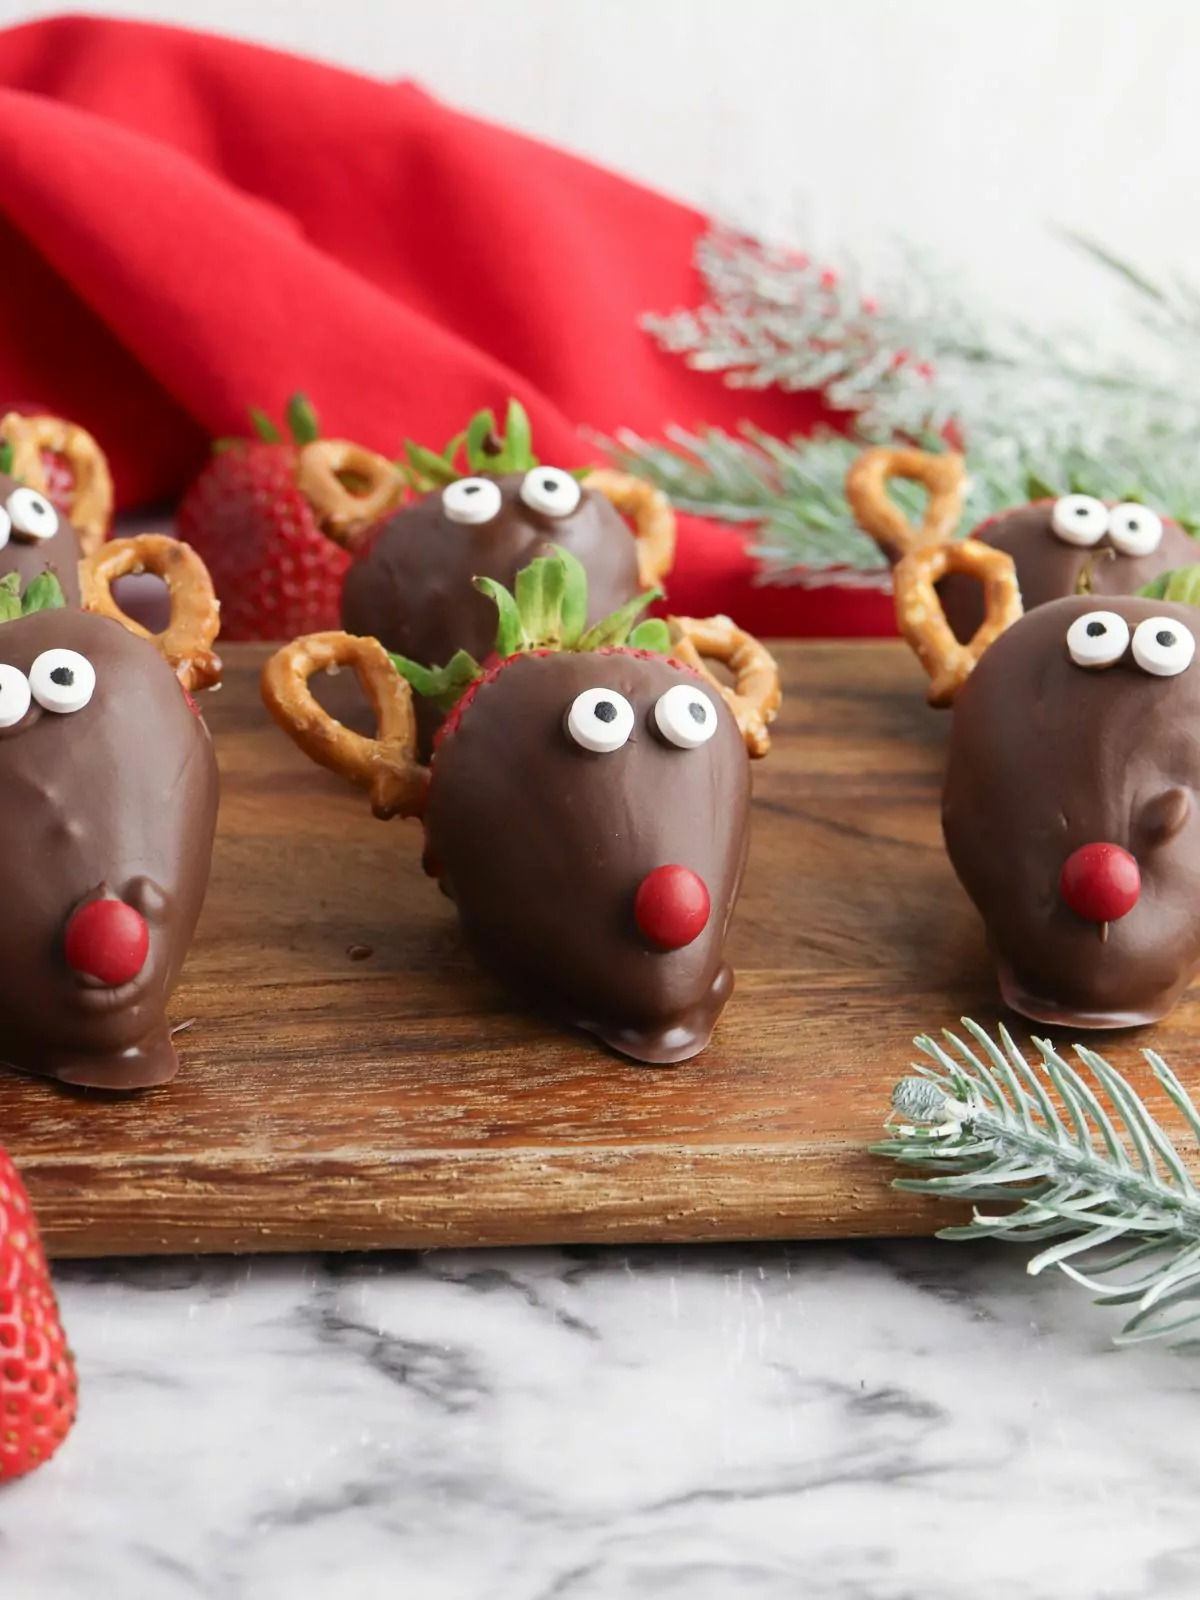 reindeers made from strawberries on cutting board.